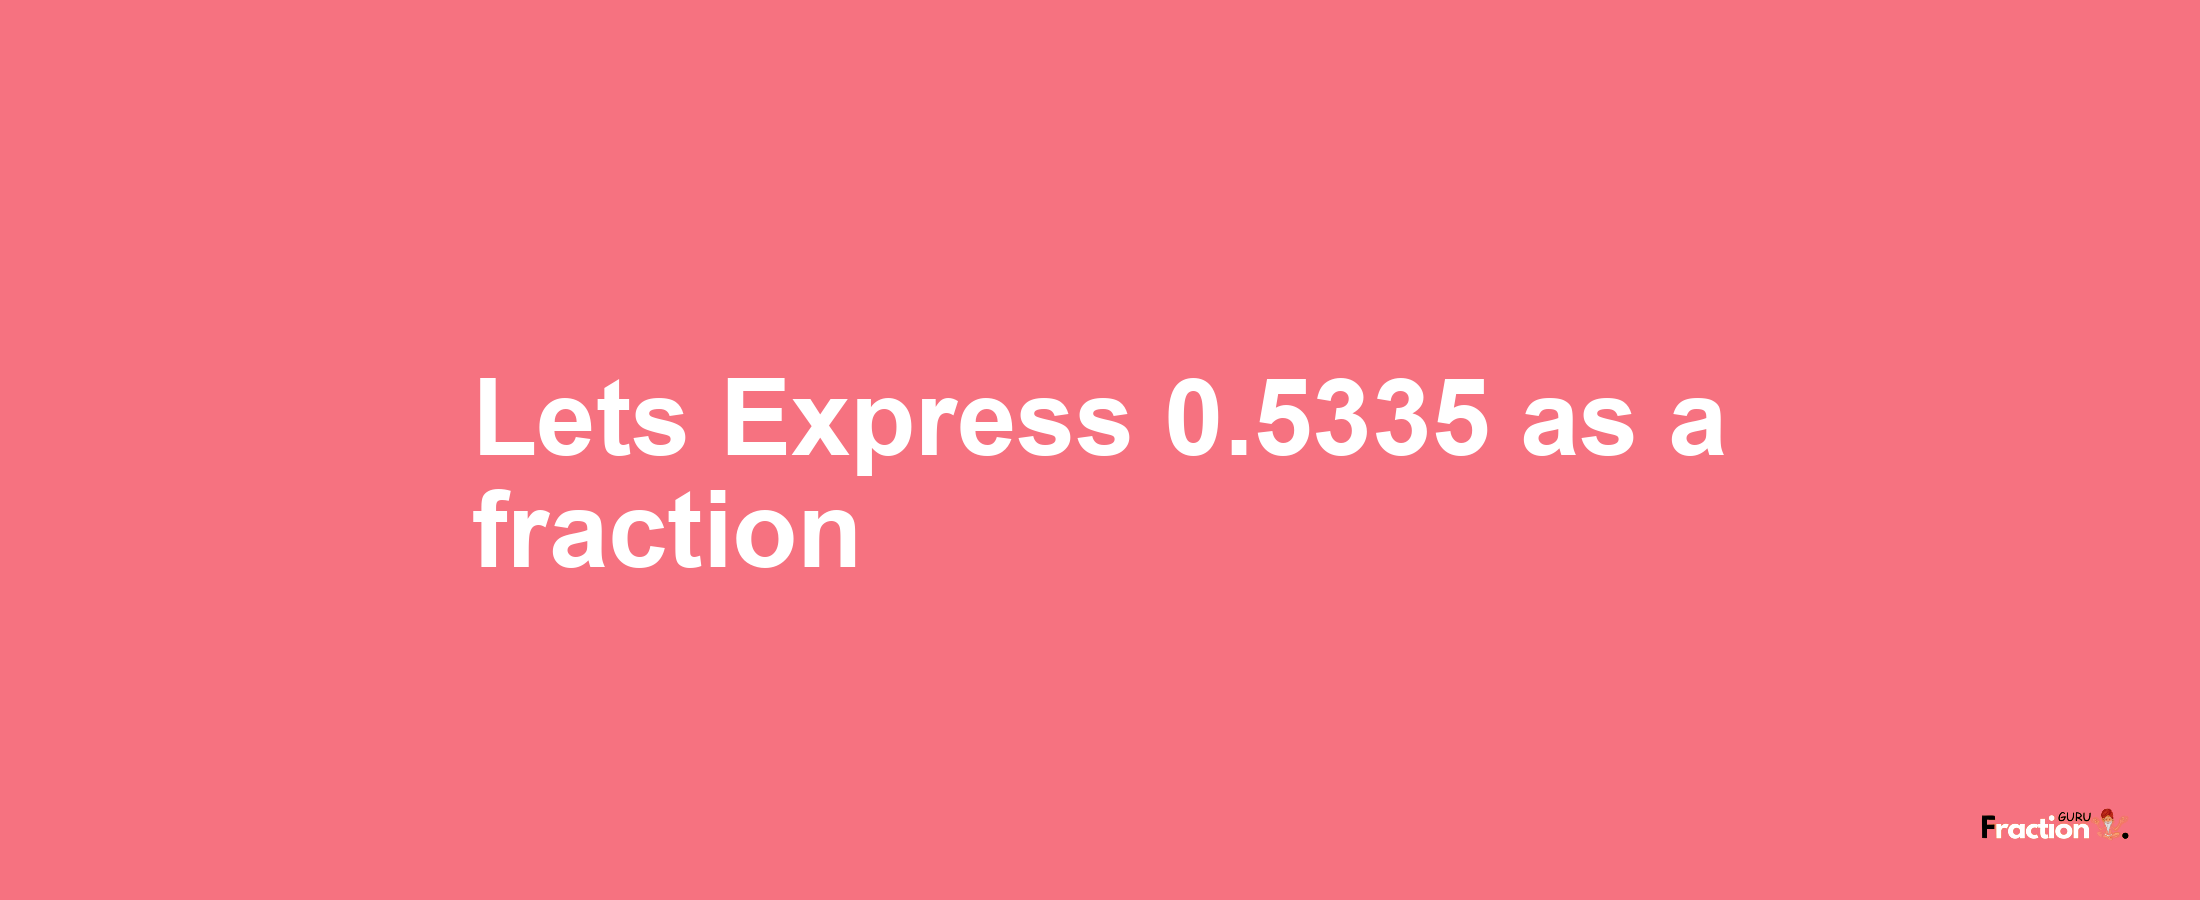 Lets Express 0.5335 as afraction